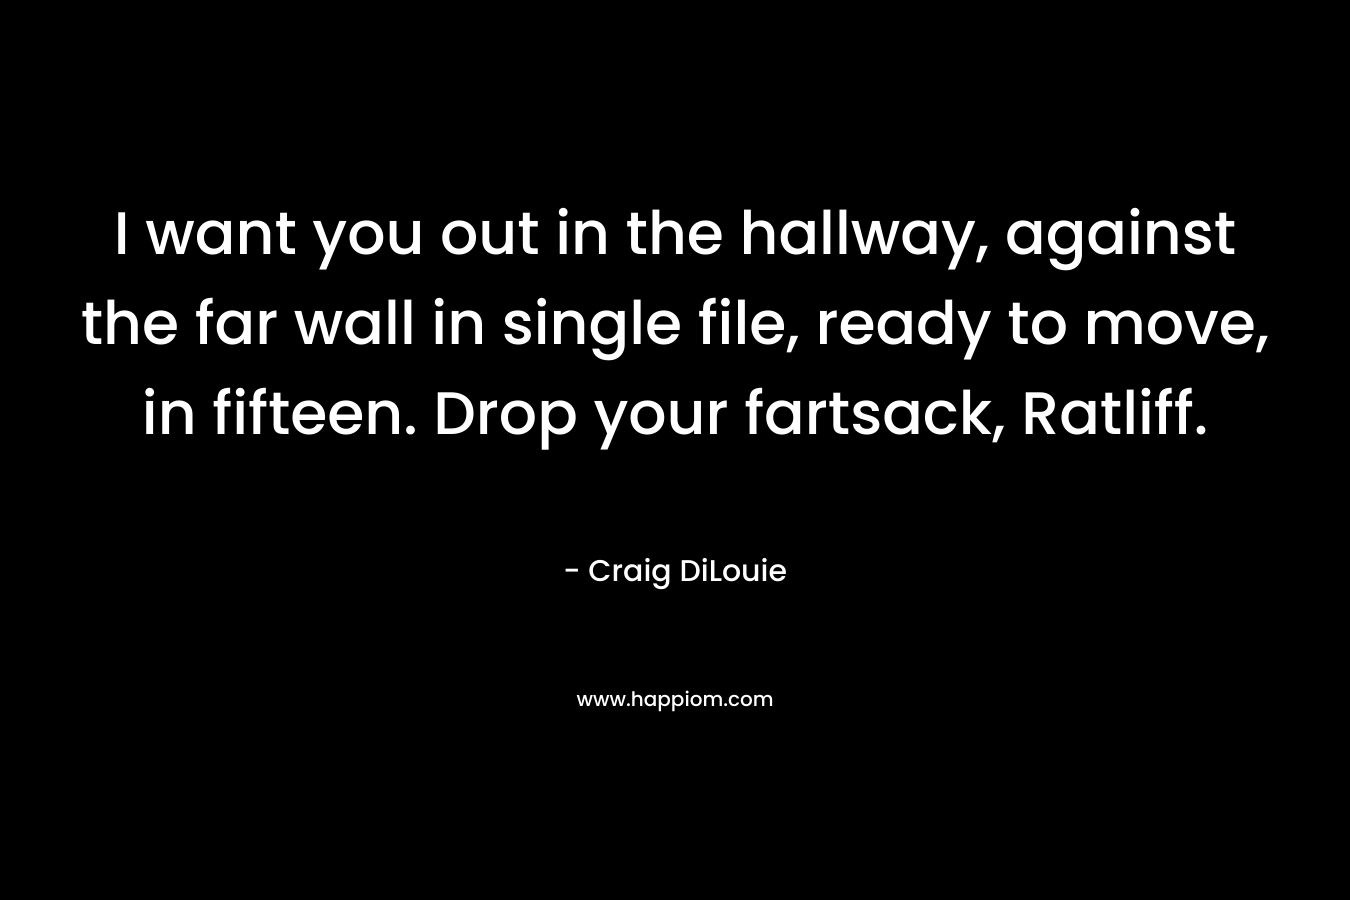 I want you out in the hallway, against the far wall in single file, ready to move, in fifteen. Drop your fartsack, Ratliff. – Craig DiLouie